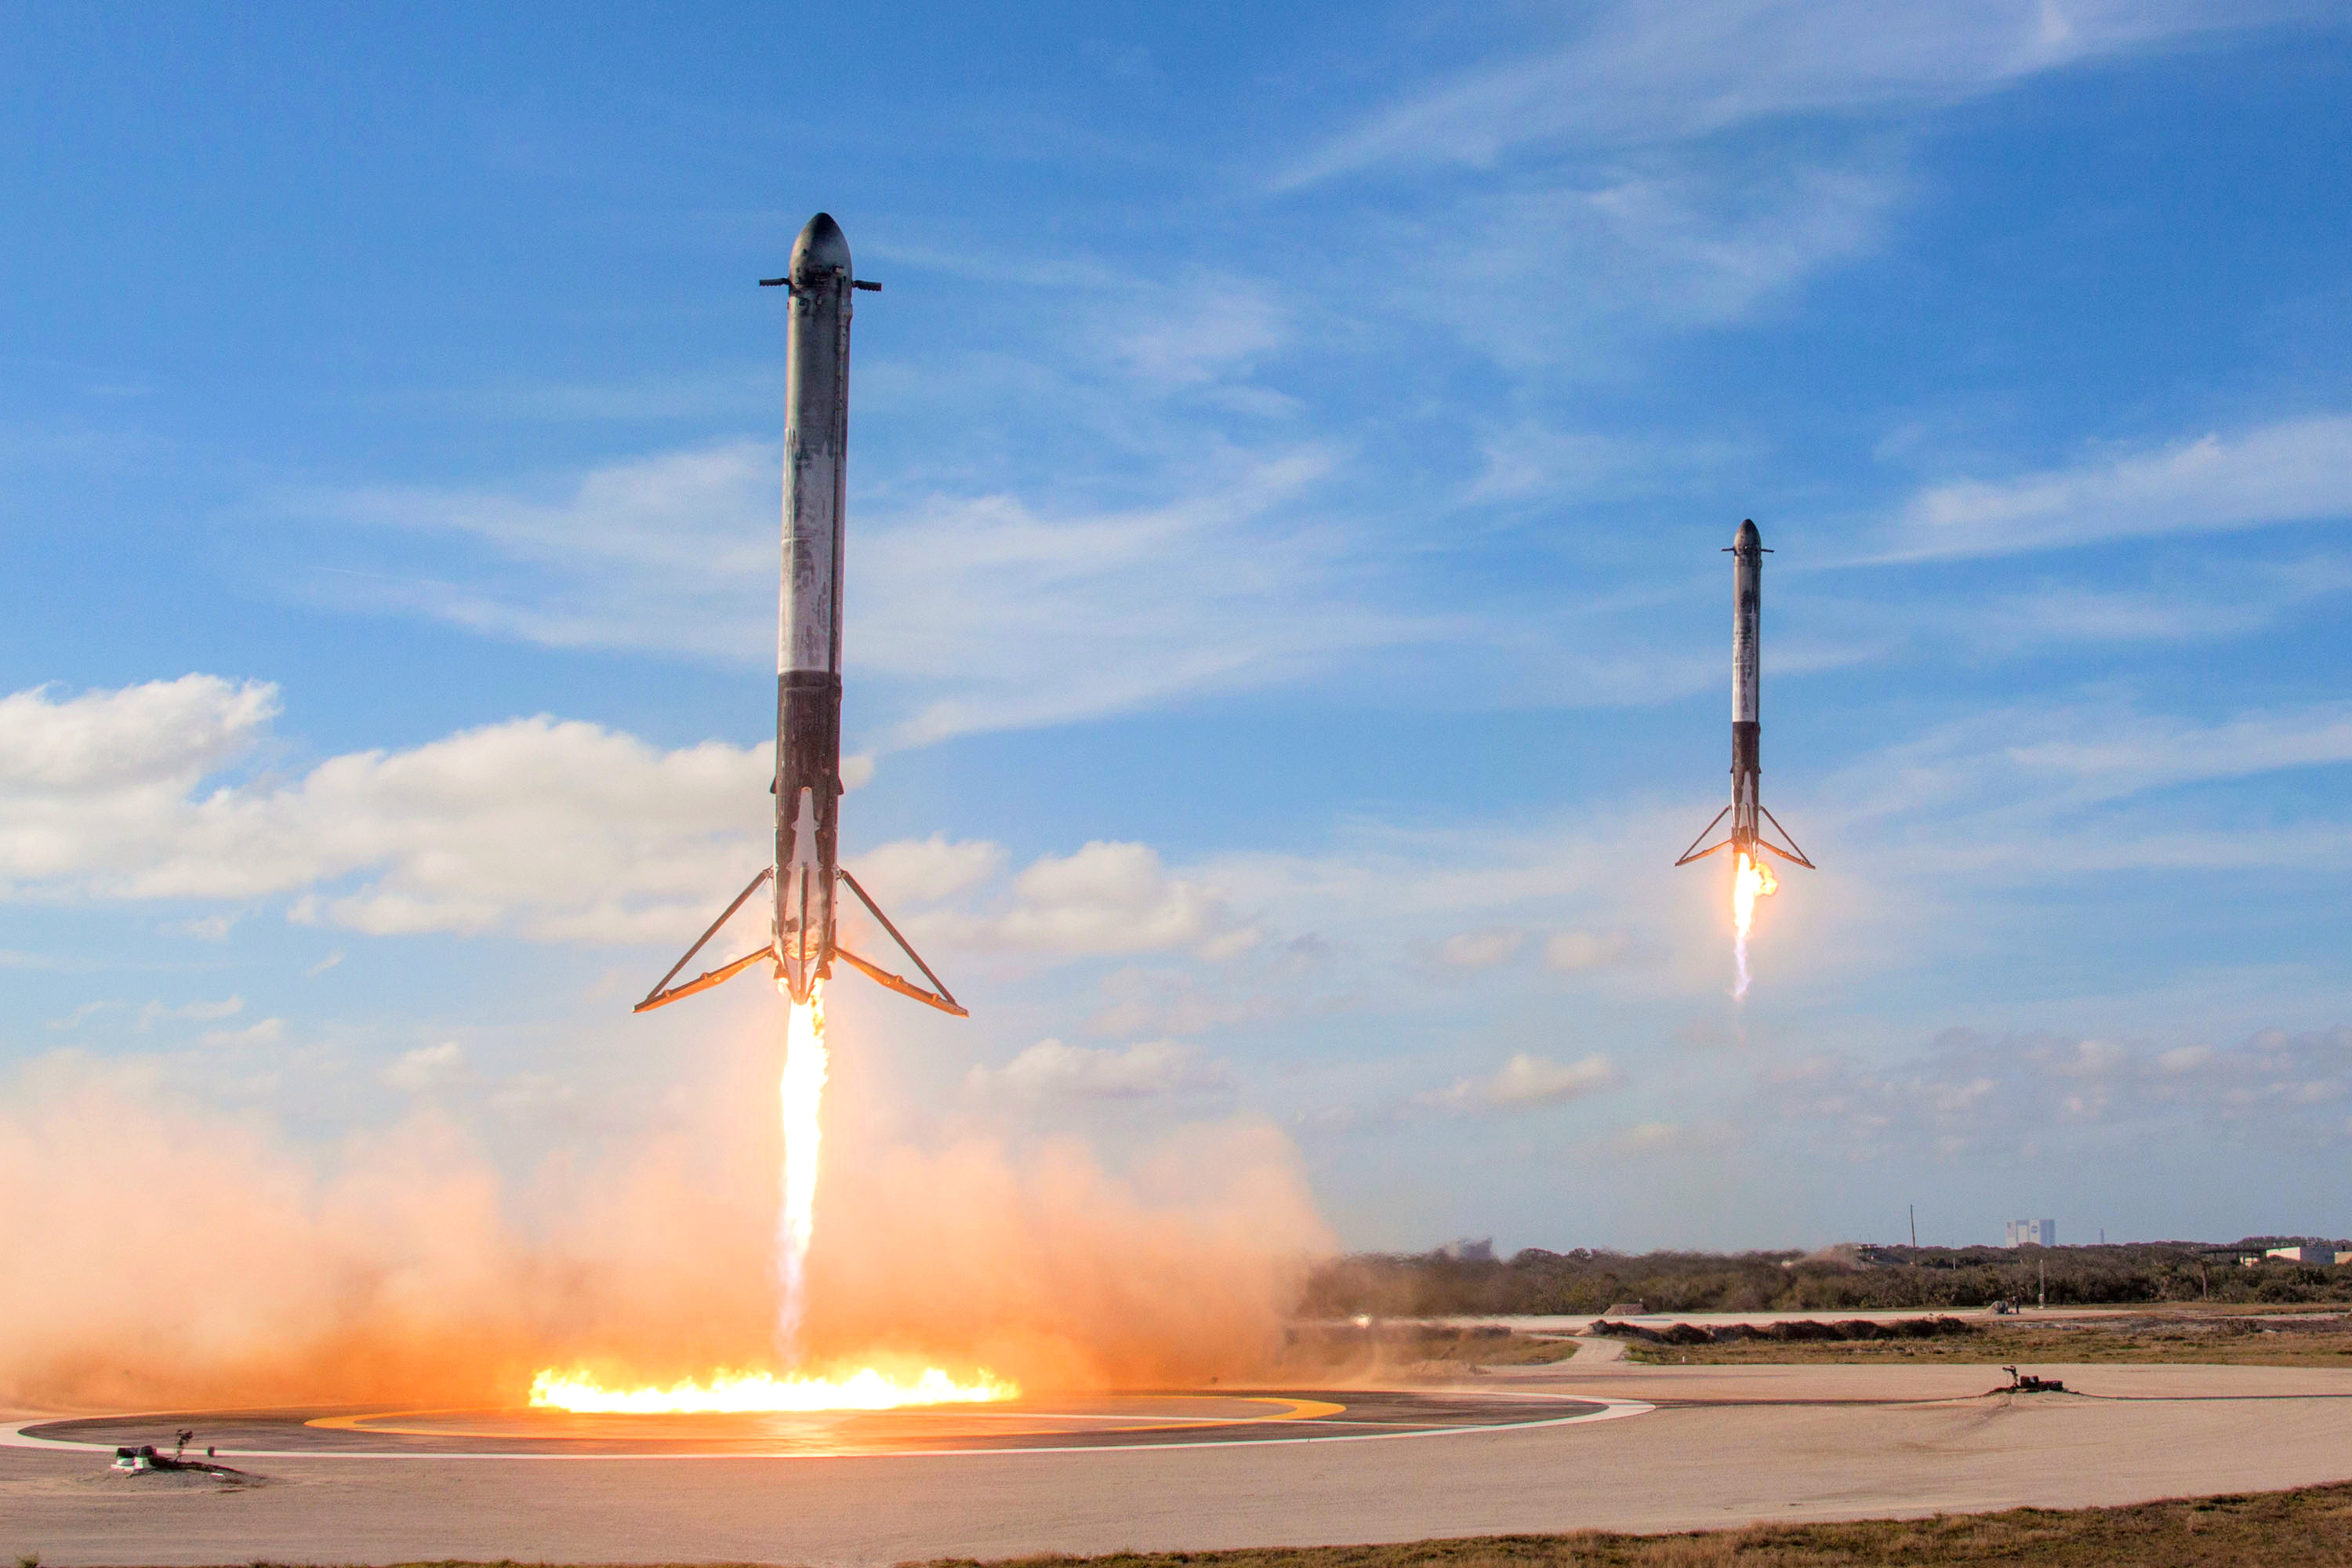 https://upload.wikimedia.org/wikipedia/commons/5/52/Falcon_Heavy_Side_Boosters_landing_on_LZ1_and_LZ2_-_2018_%2825254688767%29.jpg